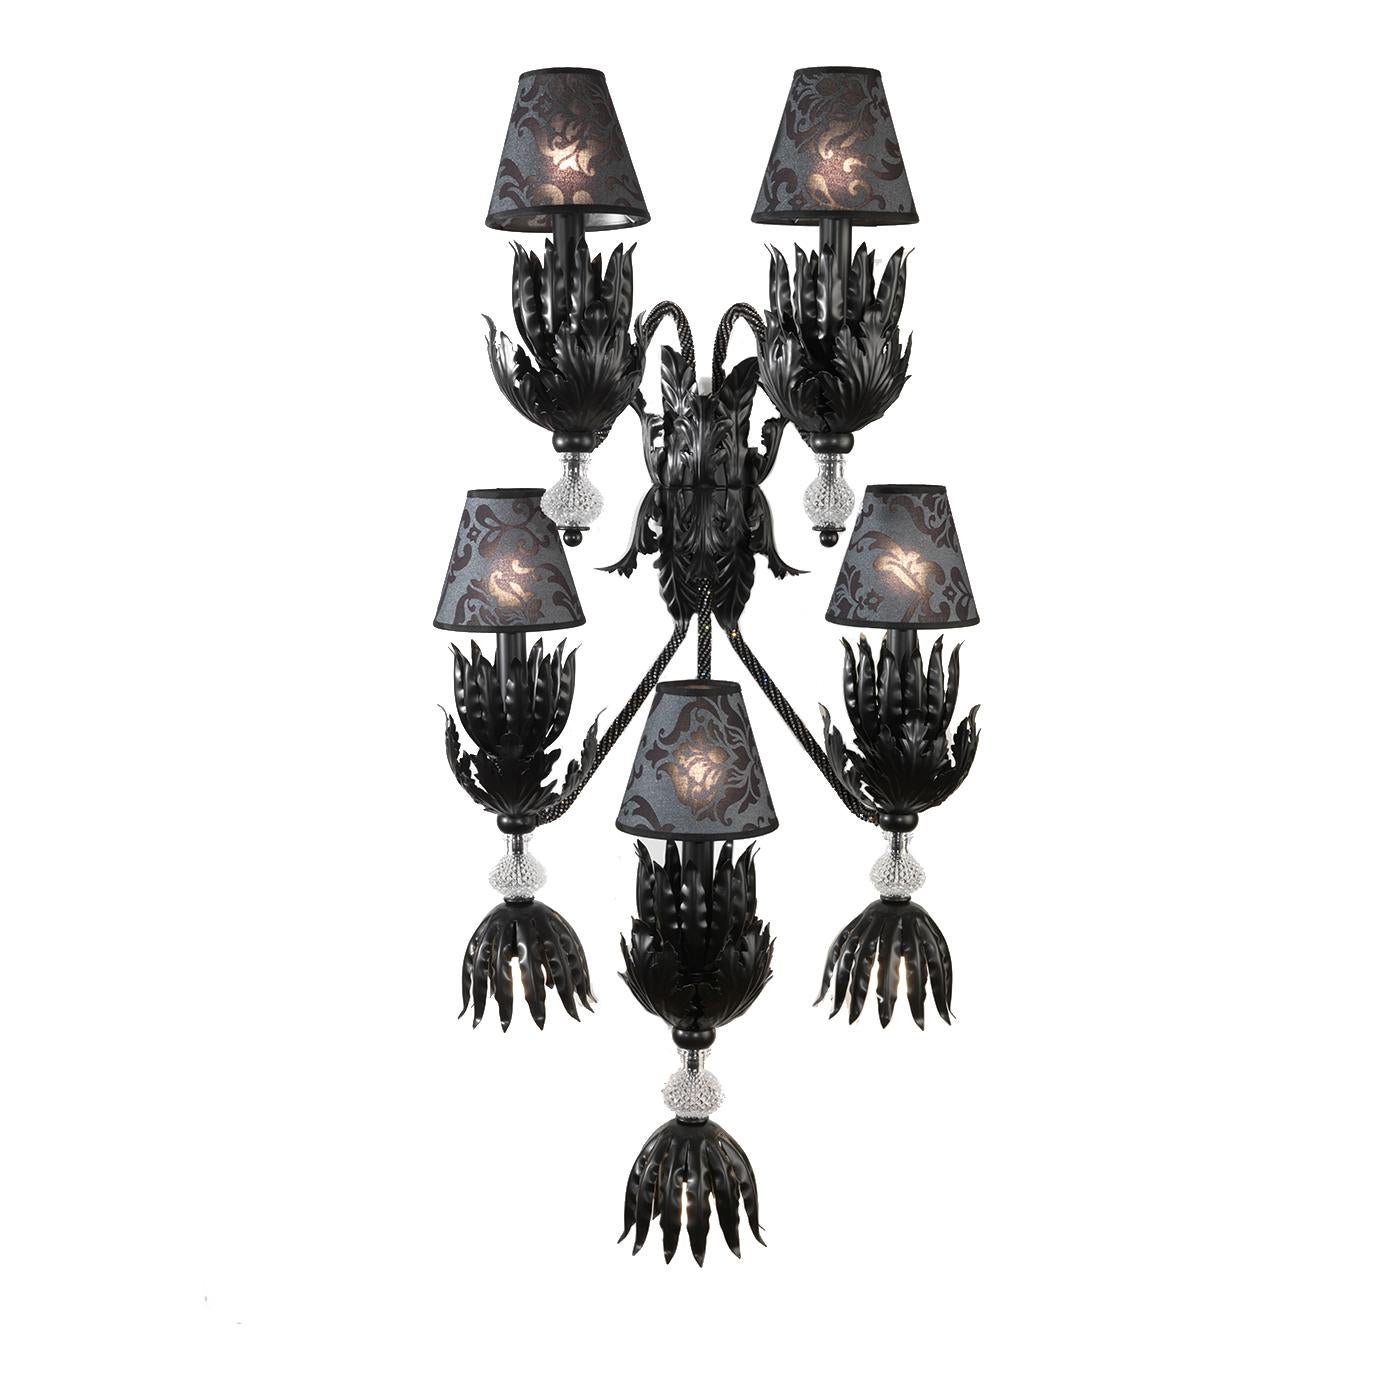 Part of the Enchanté collection, this sconce was designed by Leonardo de Carlo and will add drama and elegance to a monochromatic entryway, powder room, or living room. Its structure in hand-forged iron with a black finish comprises a base